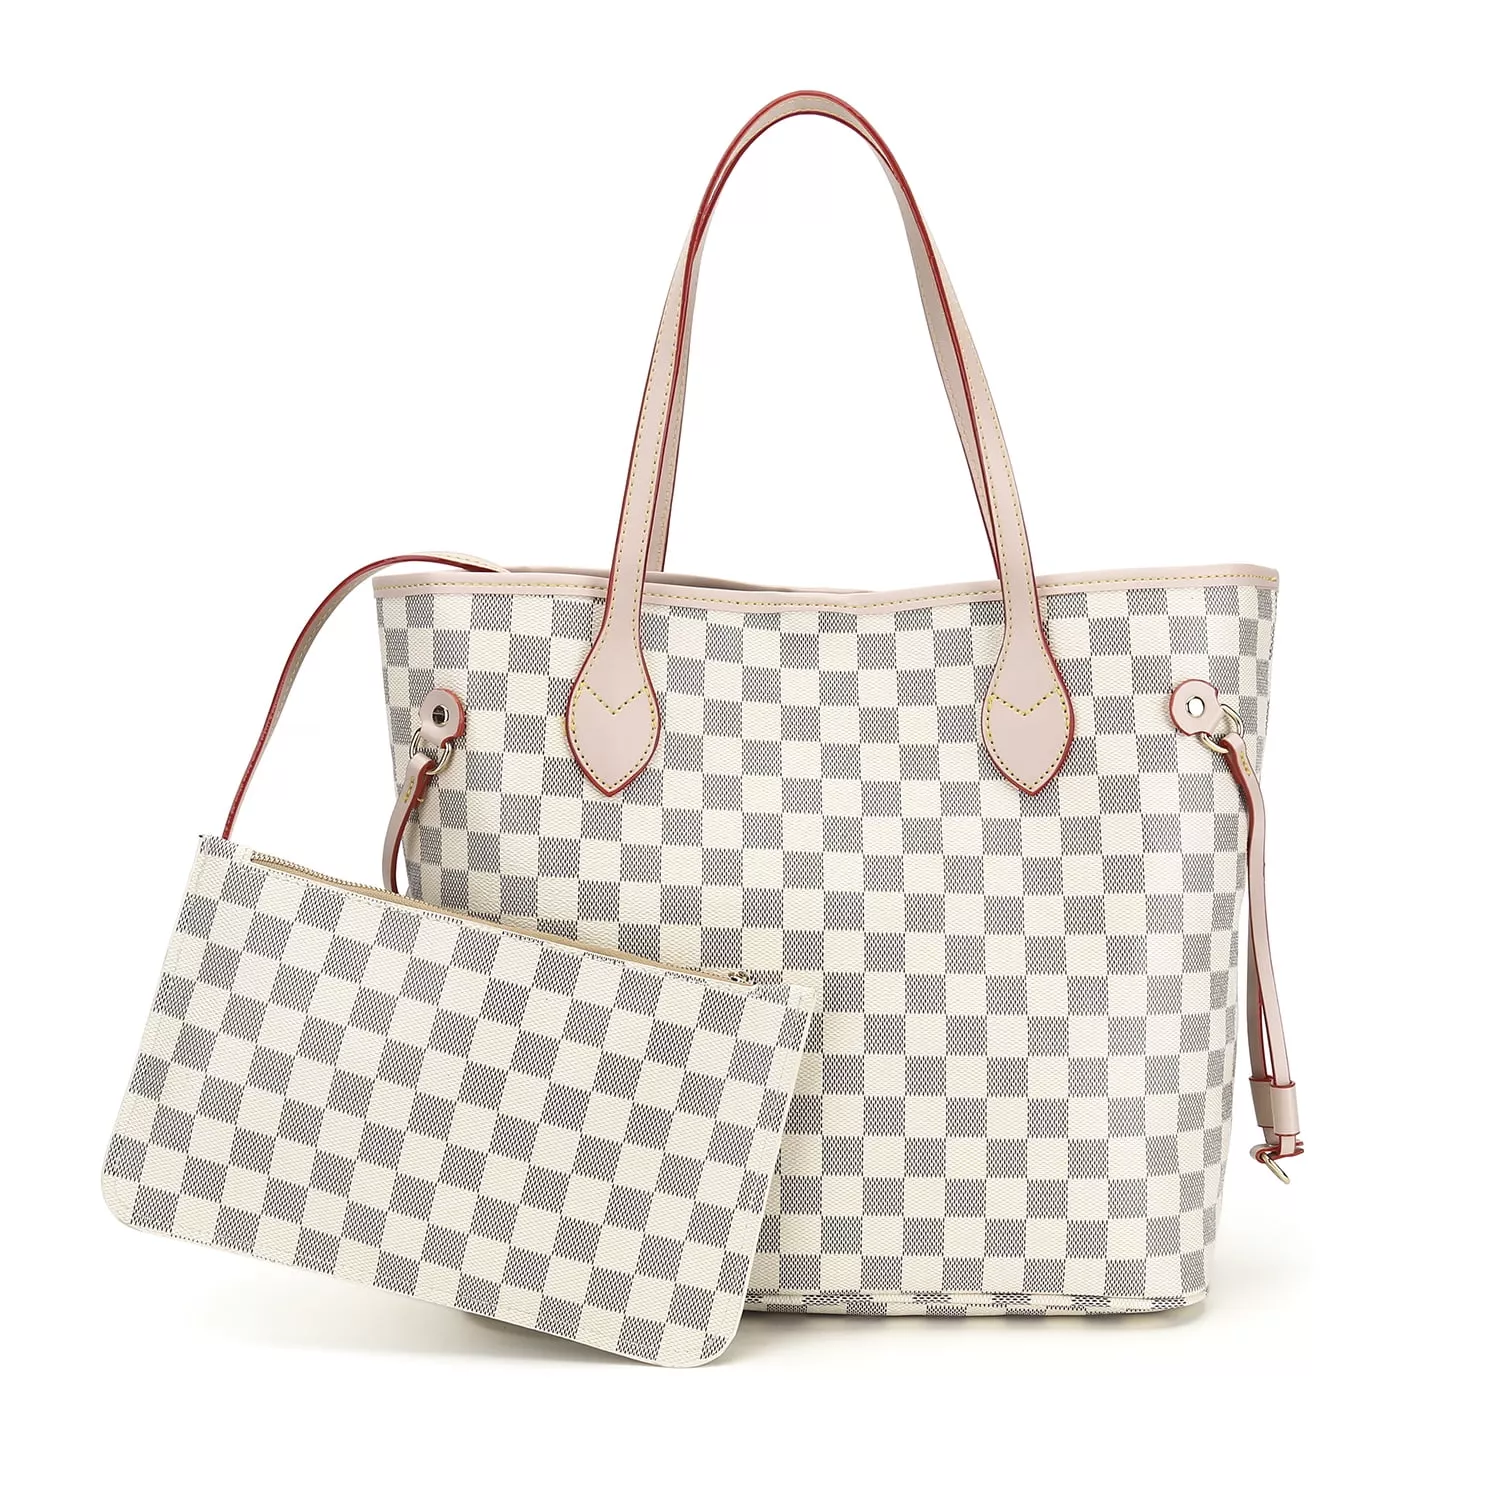 Mila Kate Womens White Checkered Tote Shoulder Bag Purse with Inner Pouch, Handbags, Women's, Size: mm, Beige